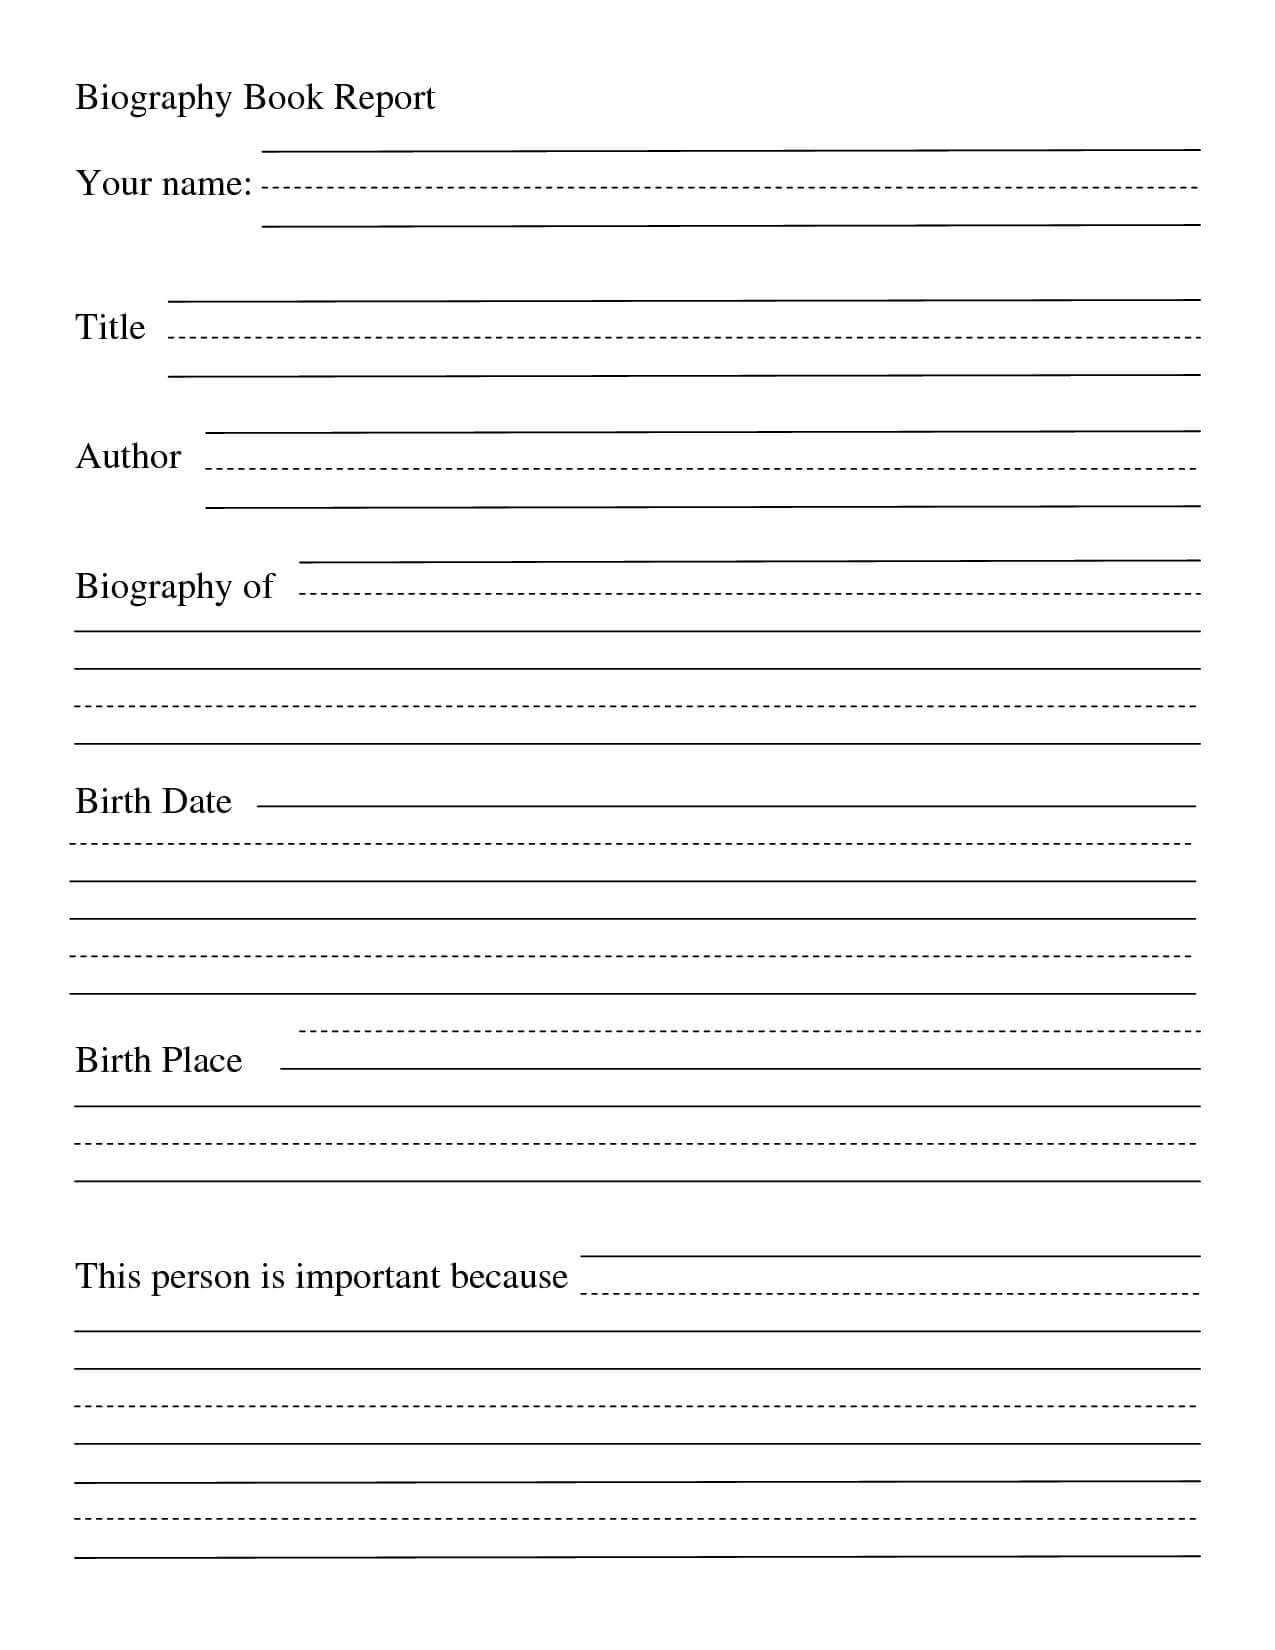 004 Biography Book Report Template Formidable Ideas Pdf High In Biography Book Report Template